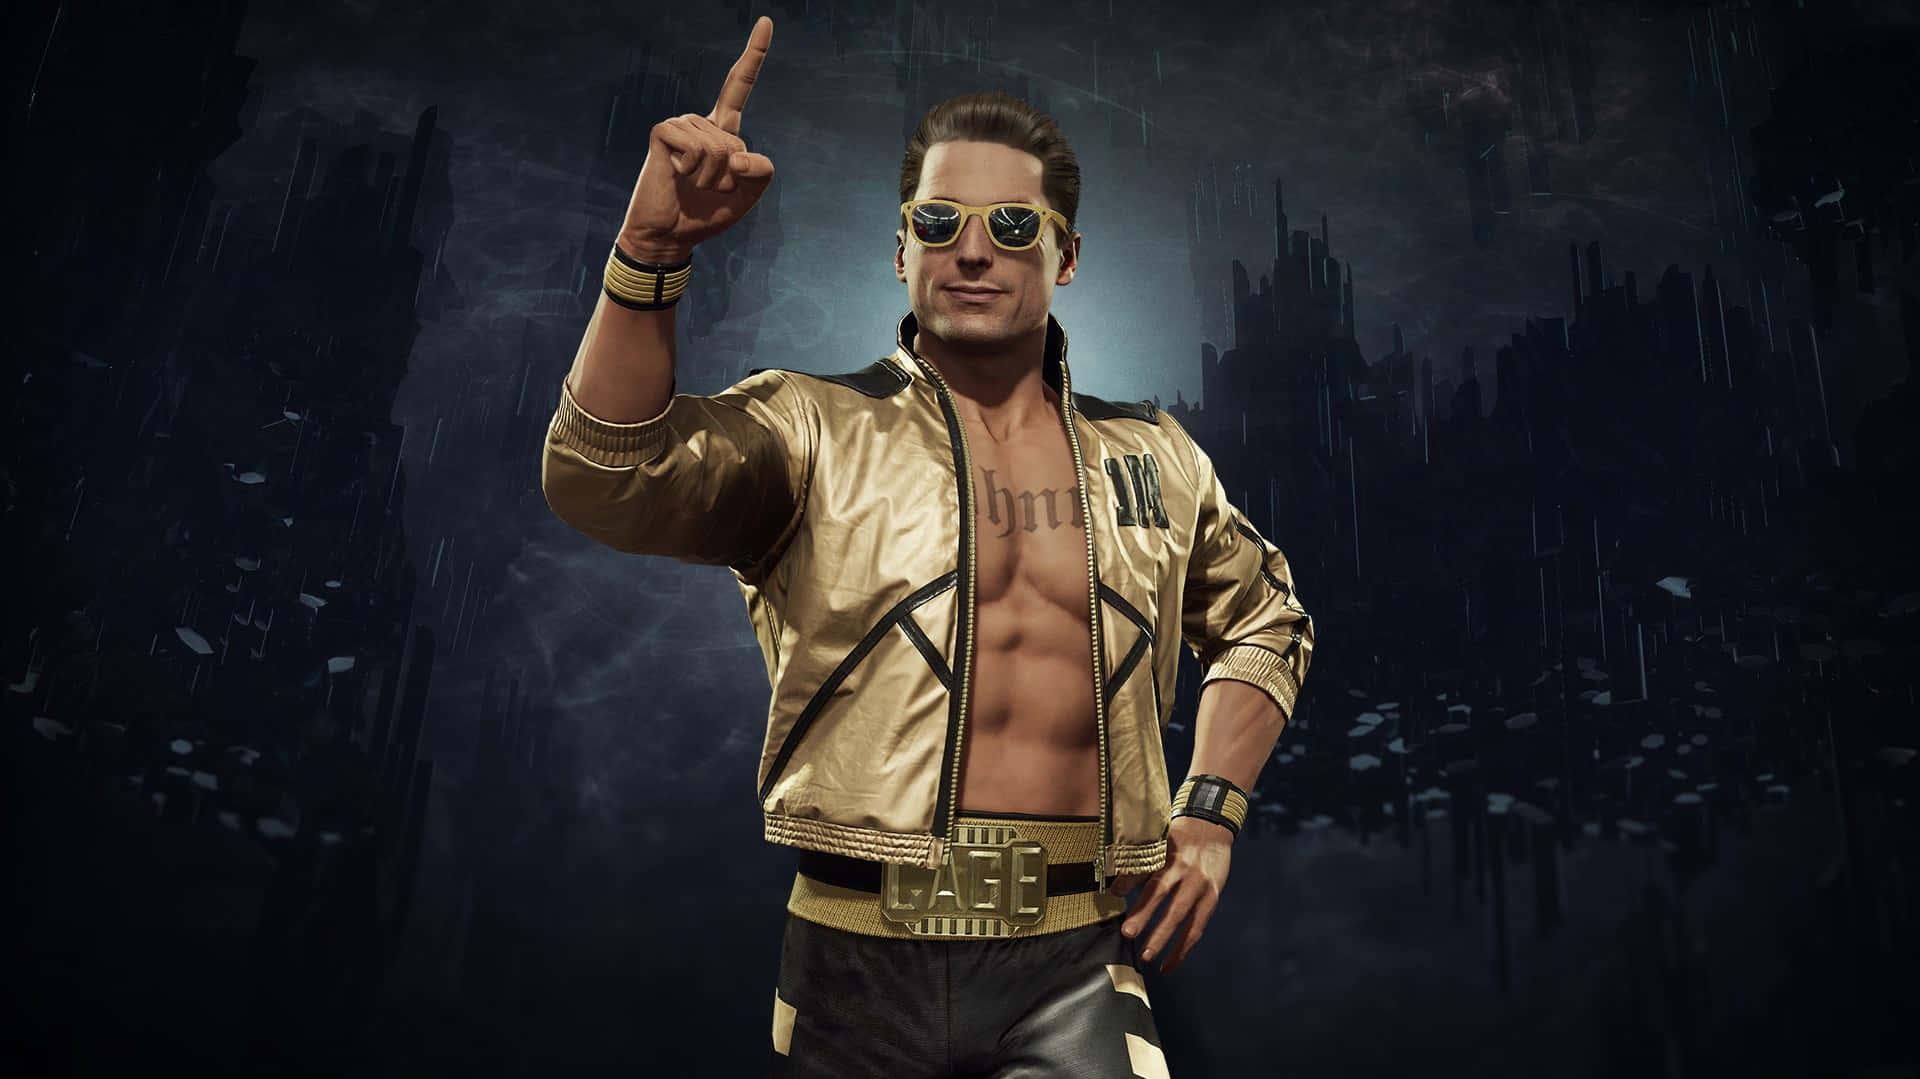 Download Johnny Cage the iconic martial artist from Mortal Kombat